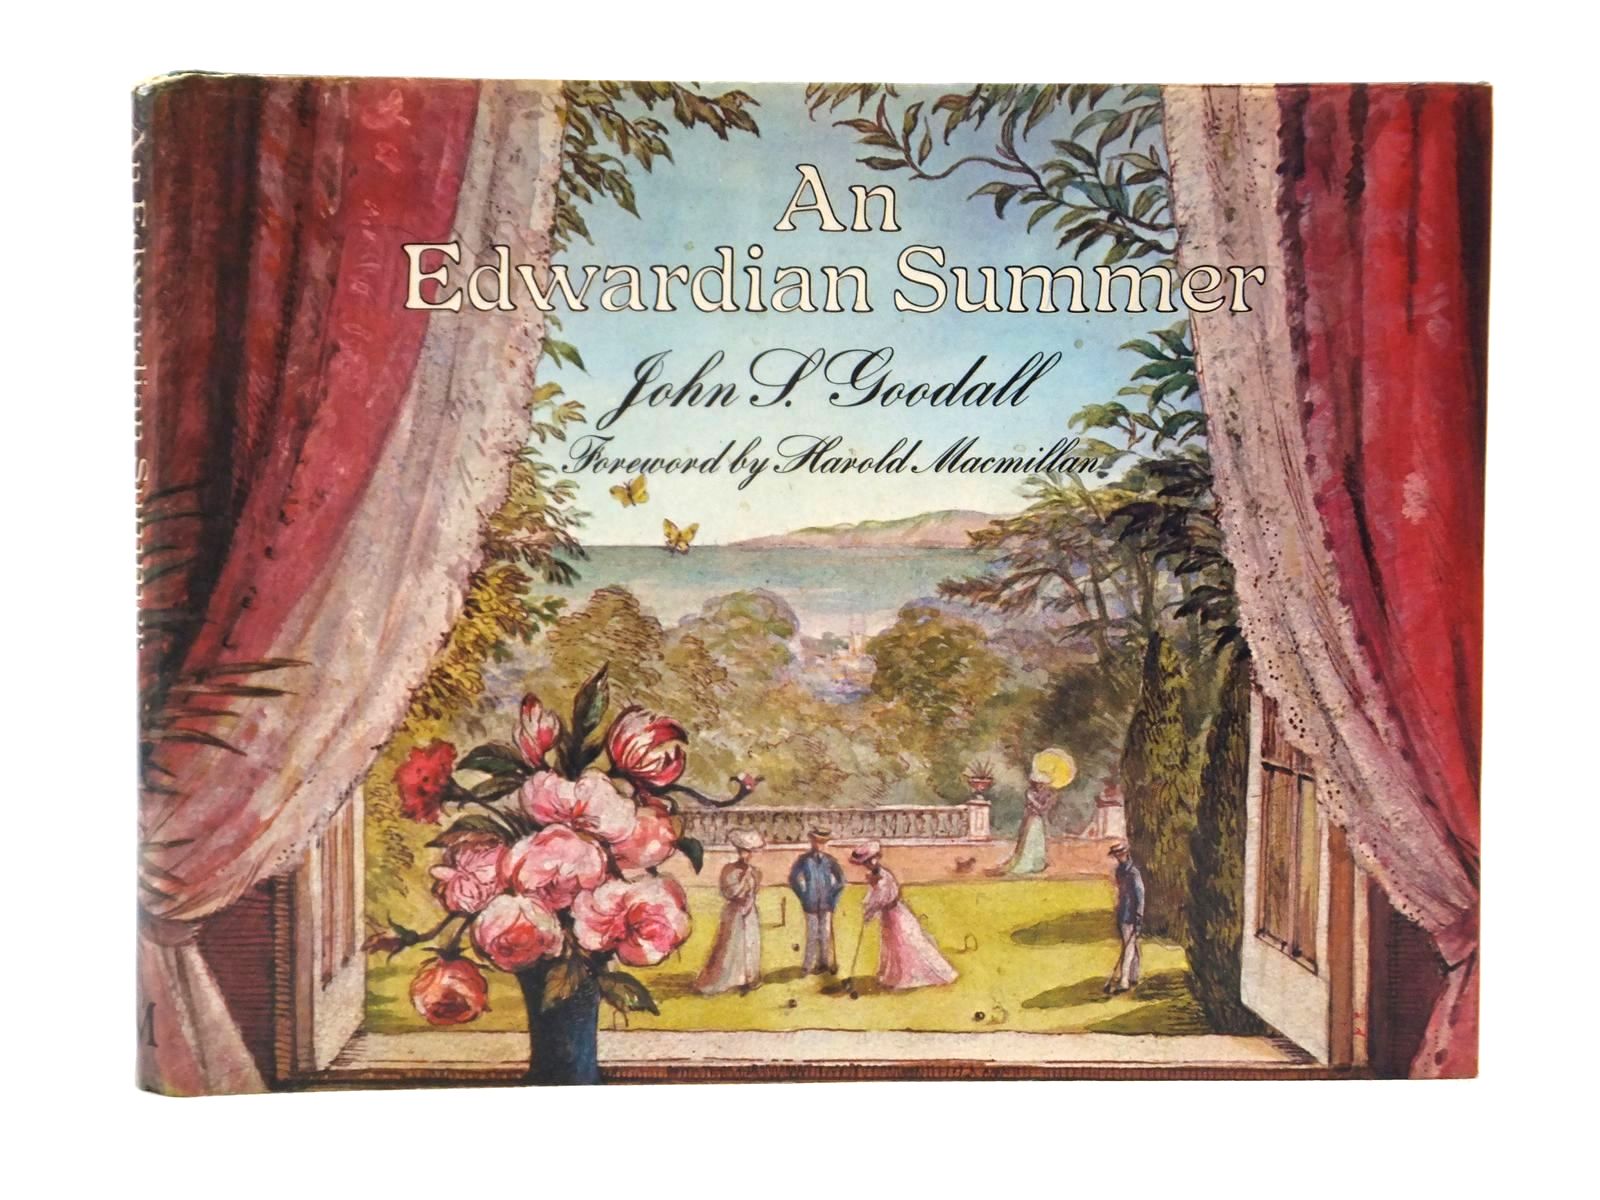 Photo of AN EDWARDIAN SUMMER written by Goodall, John S. illustrated by Goodall, John S. published by Macmillan London Limited (STOCK CODE: 1609207)  for sale by Stella & Rose's Books